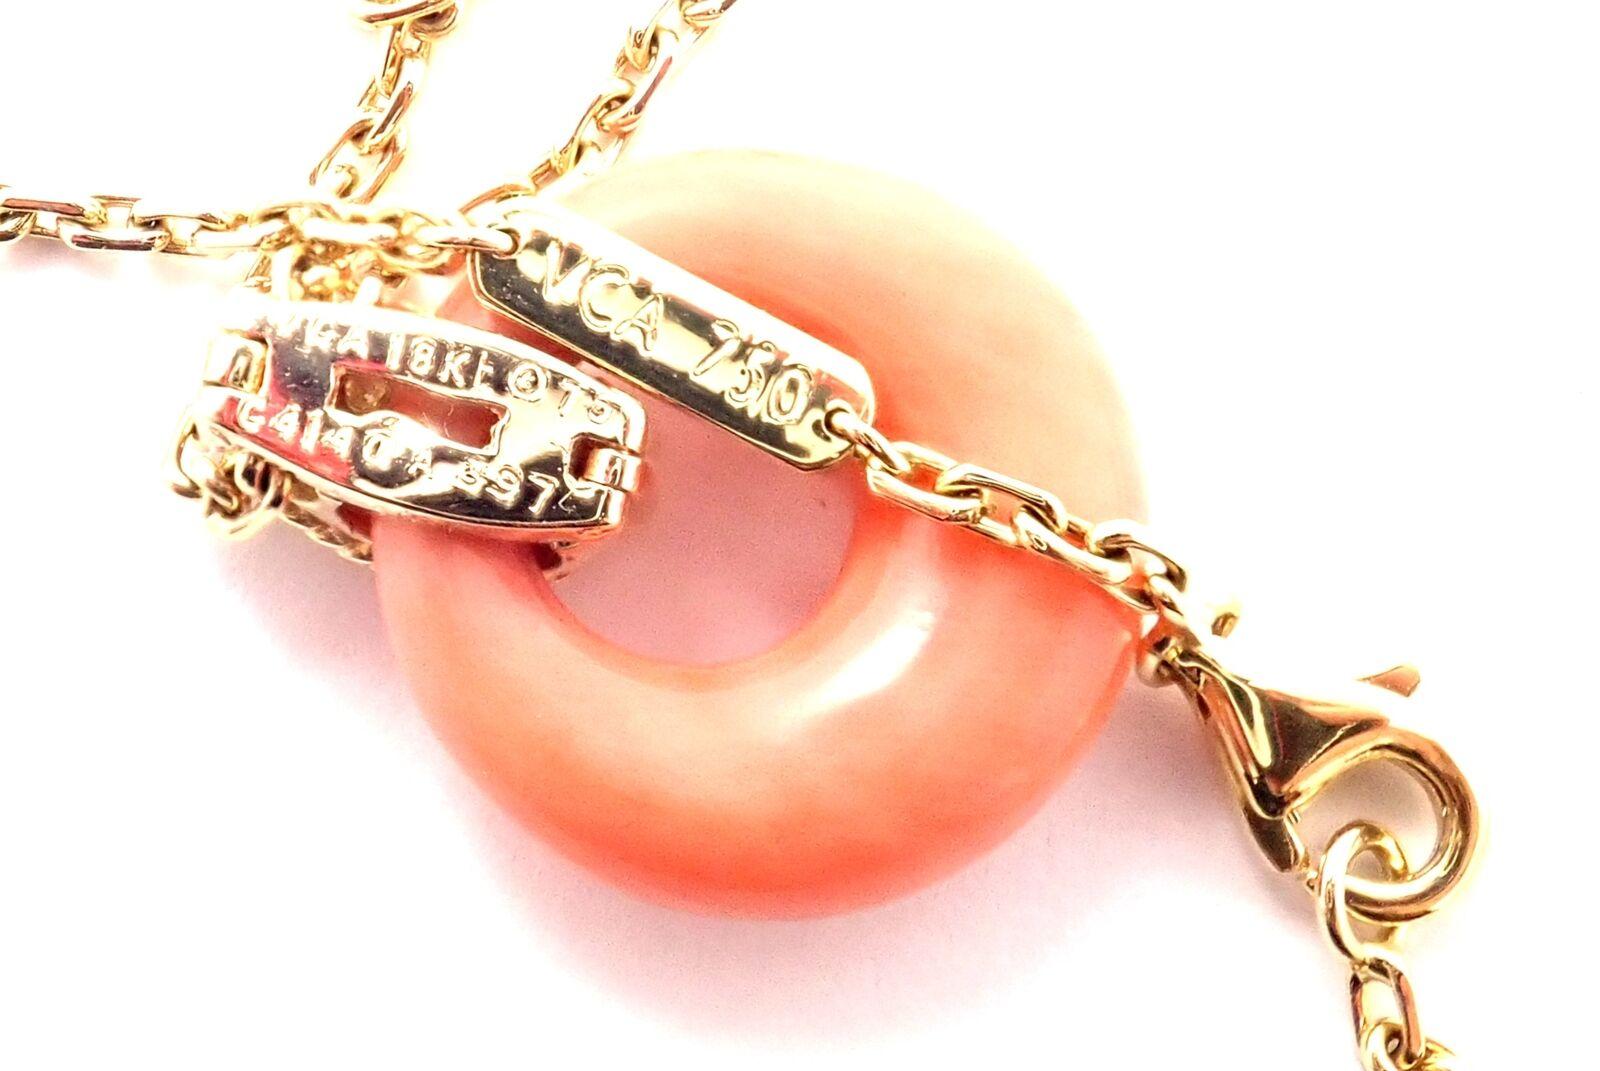 Van Cleef & Arpels Diamond Coral Yellow Gold Pendant Necklace In Excellent Condition For Sale In Holland, PA